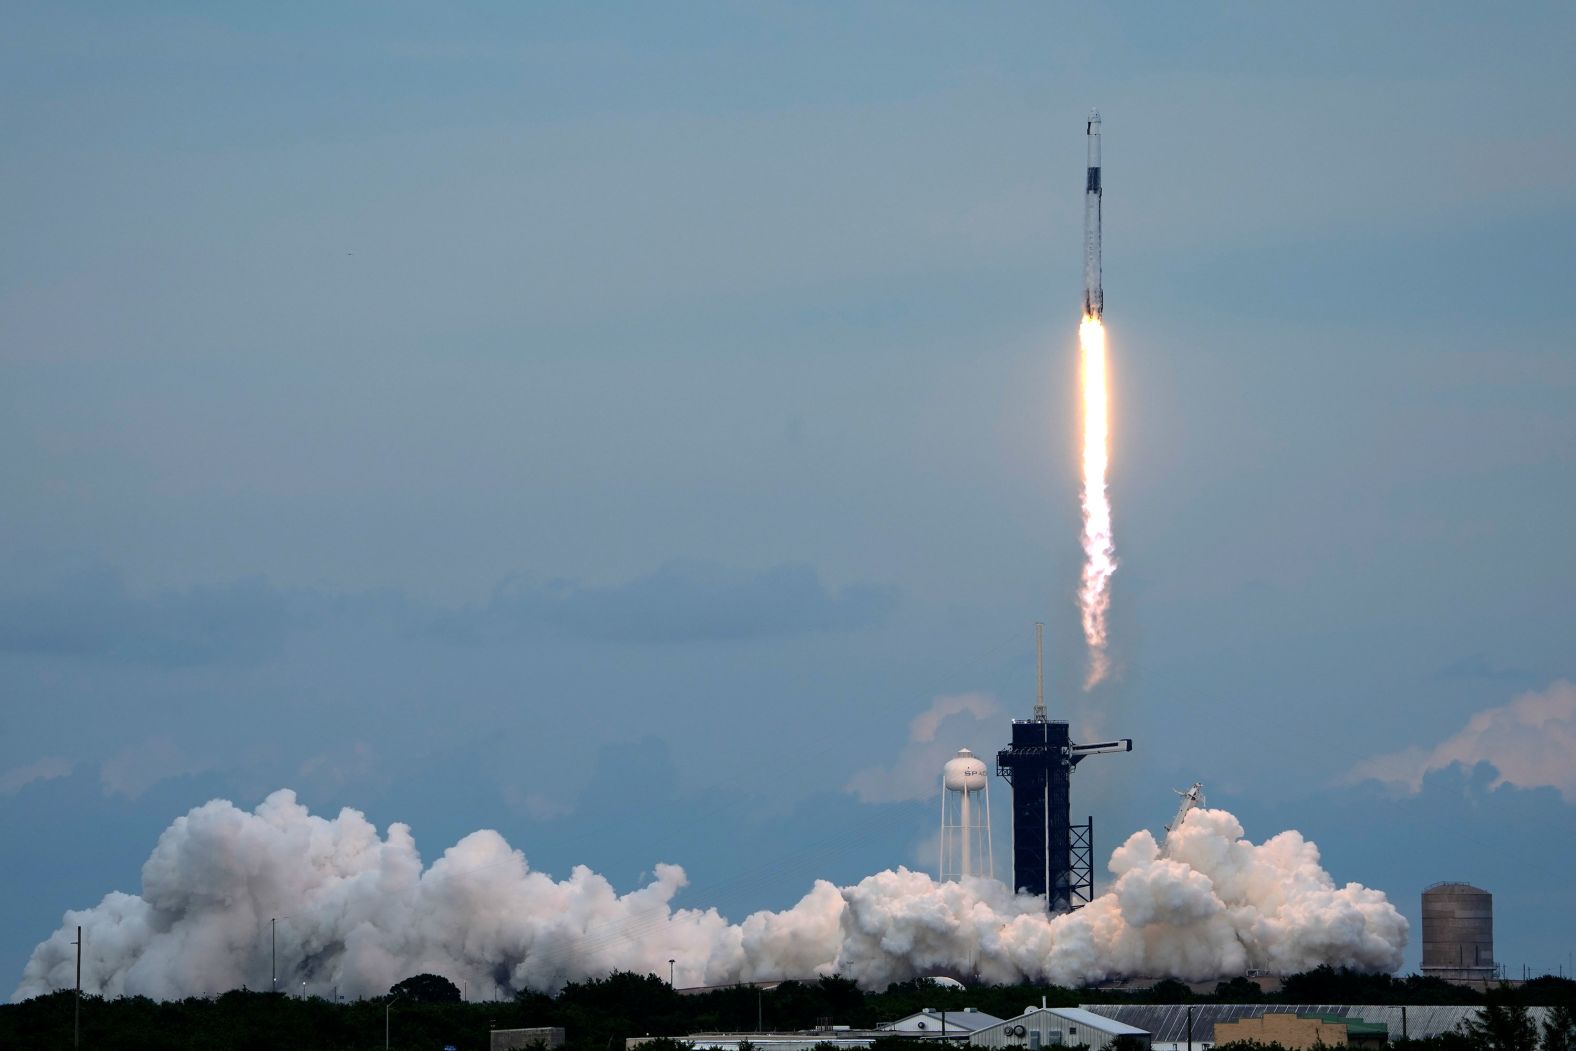 A SpaceX rocket, carrying a former NASA astronaut and three paying customers, <a href="index.php?page=&url=https%3A%2F%2Fwww.cnn.com%2F2023%2F05%2F21%2Fworld%2Fspacex-axiom-mission-2-launch%2Findex.html" target="_blank">takes off from the Kennedy Space Center</a> in Cape Canaveral, Florida, on Sunday, May 21. The crew was set for a weeklong stay aboard the International Space Station. It's the second all-private mission to the orbiting outpost.